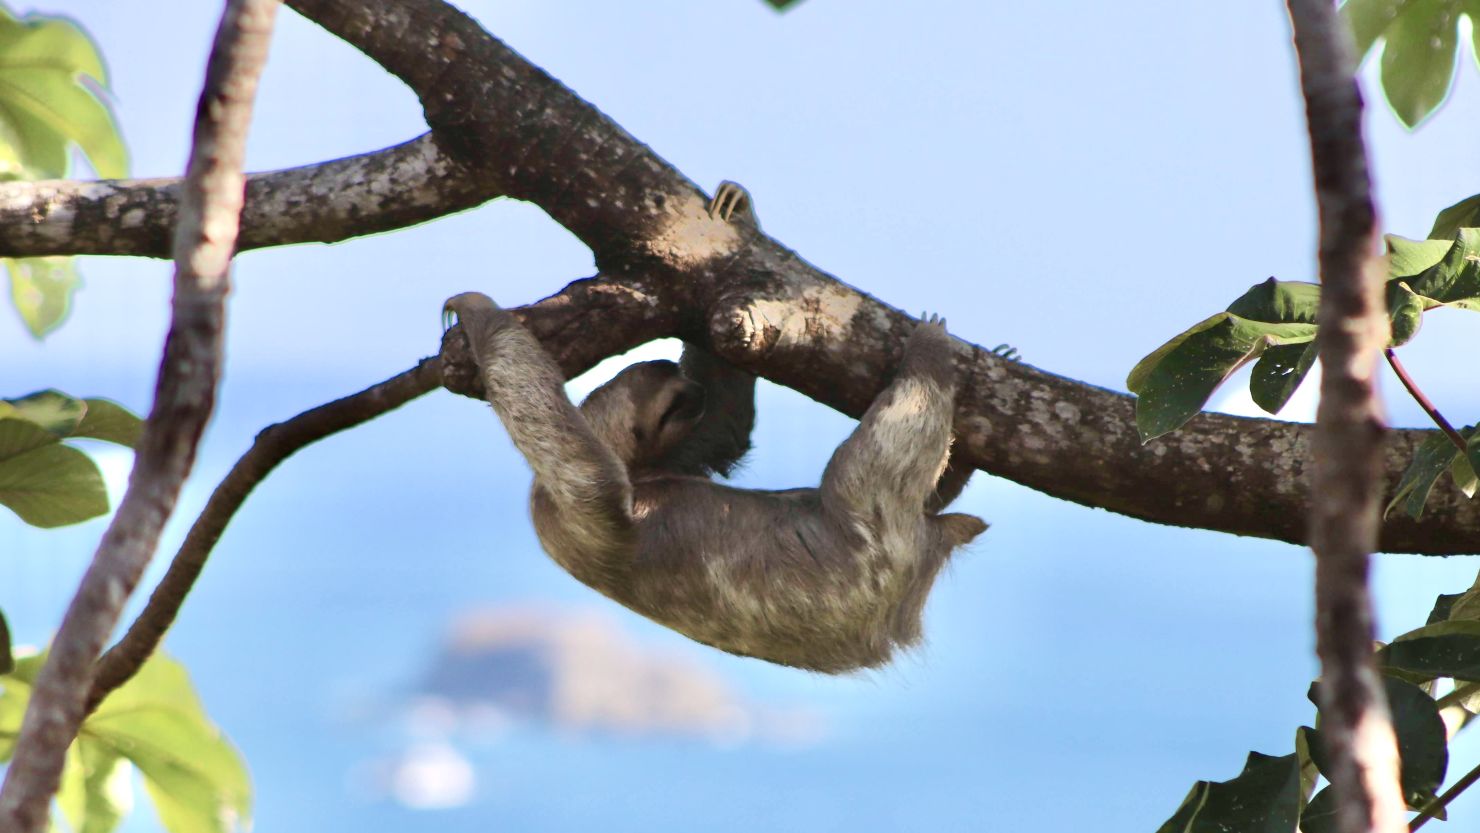 Costa Rica is known for its wildlife, including sloths.